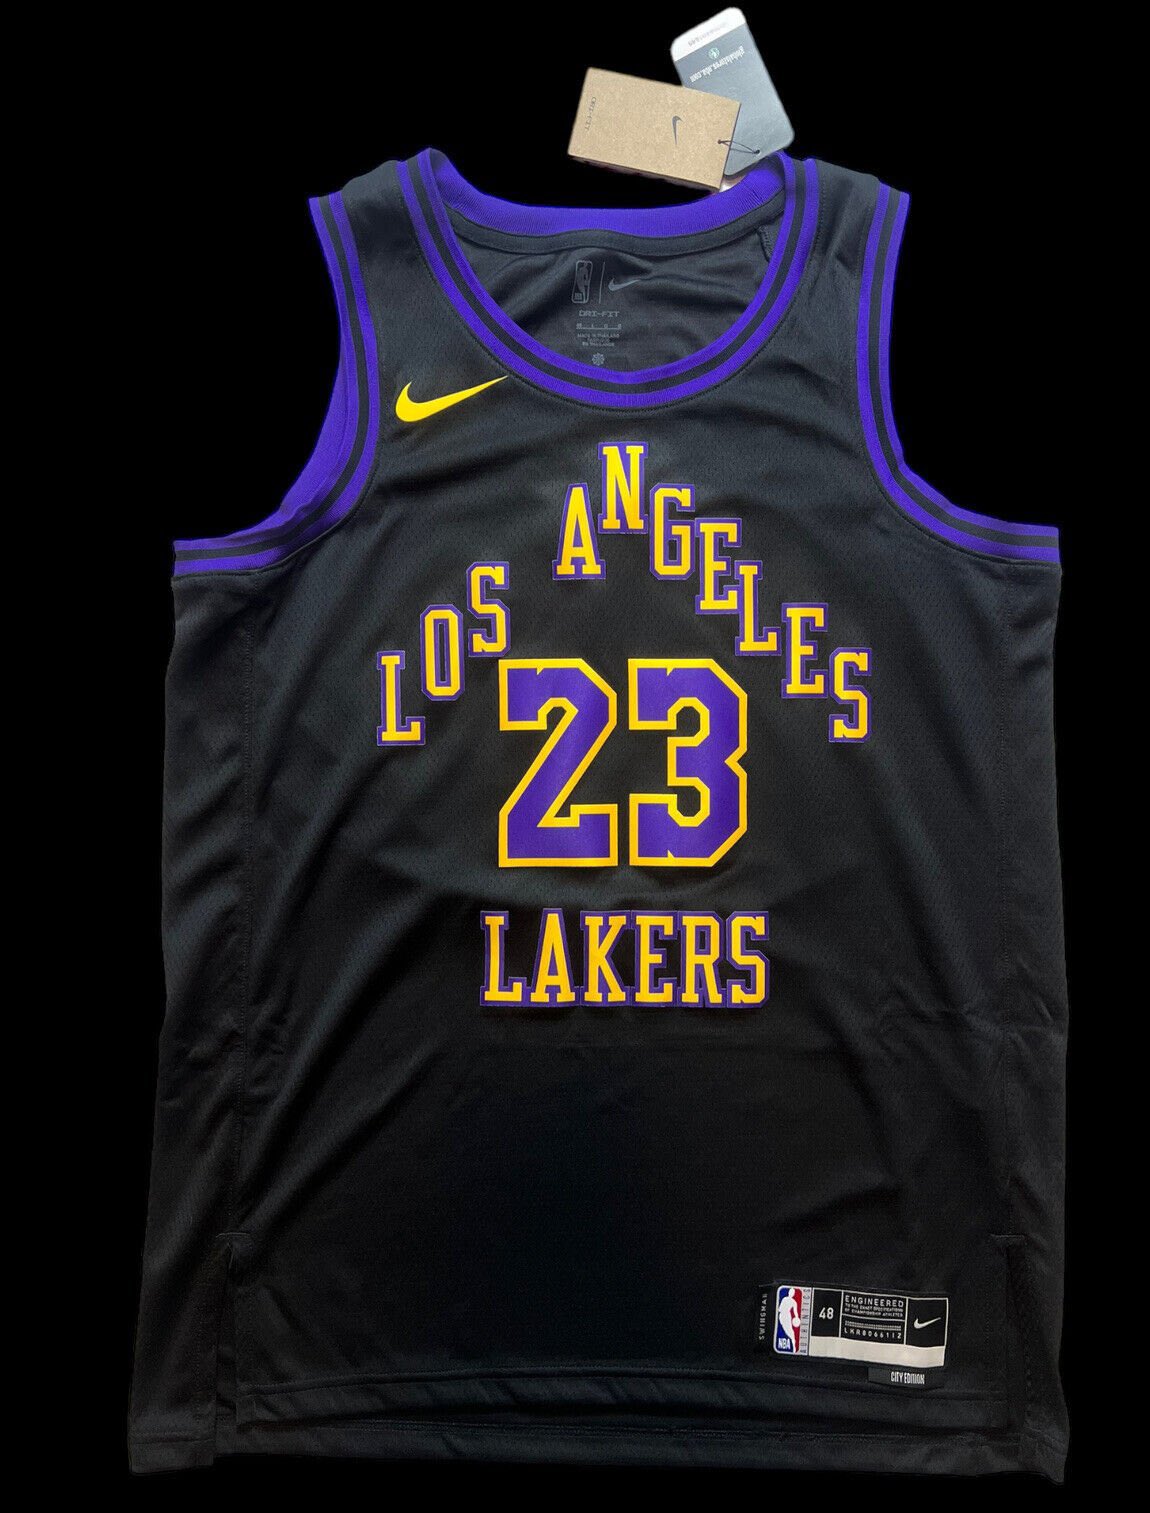 Leaked 2024 lakers city edition jerseys. Thoughts?